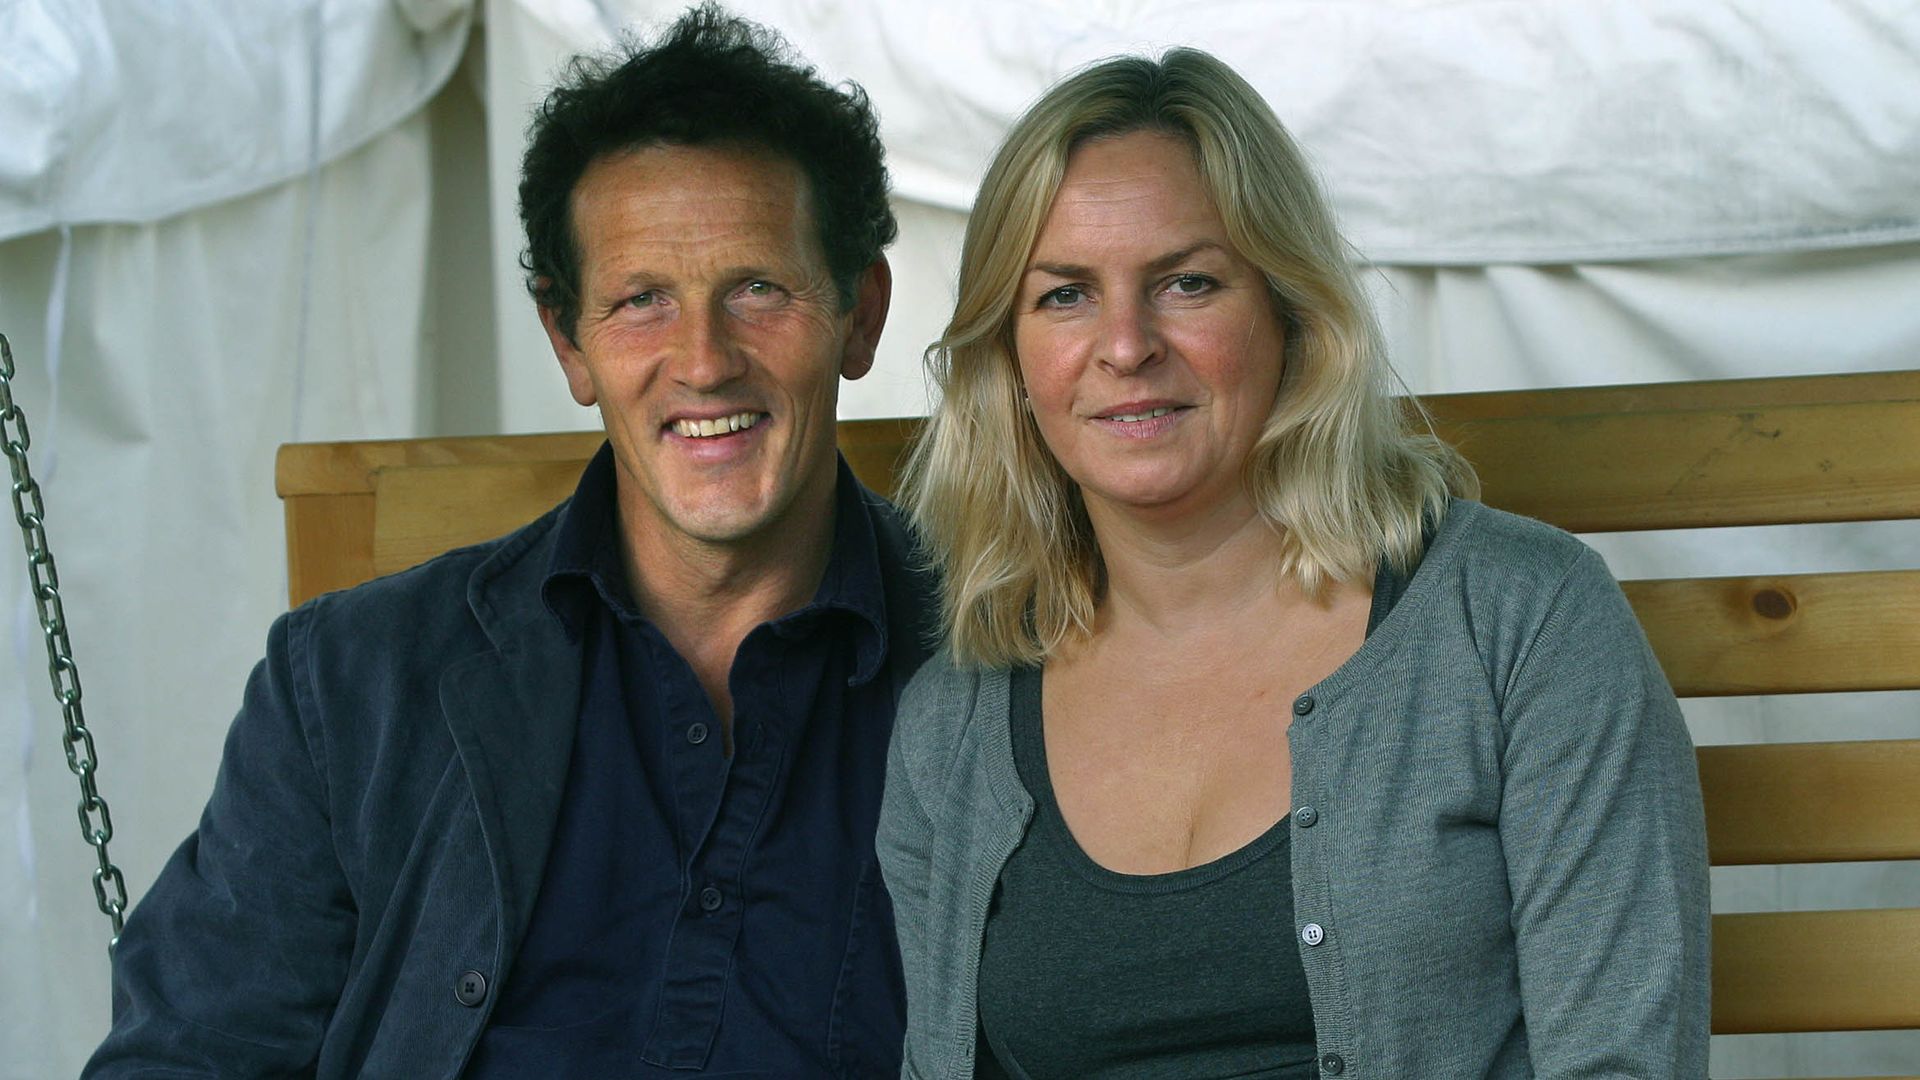 British television presenter and gardener Monty Don, with his wife Sarah